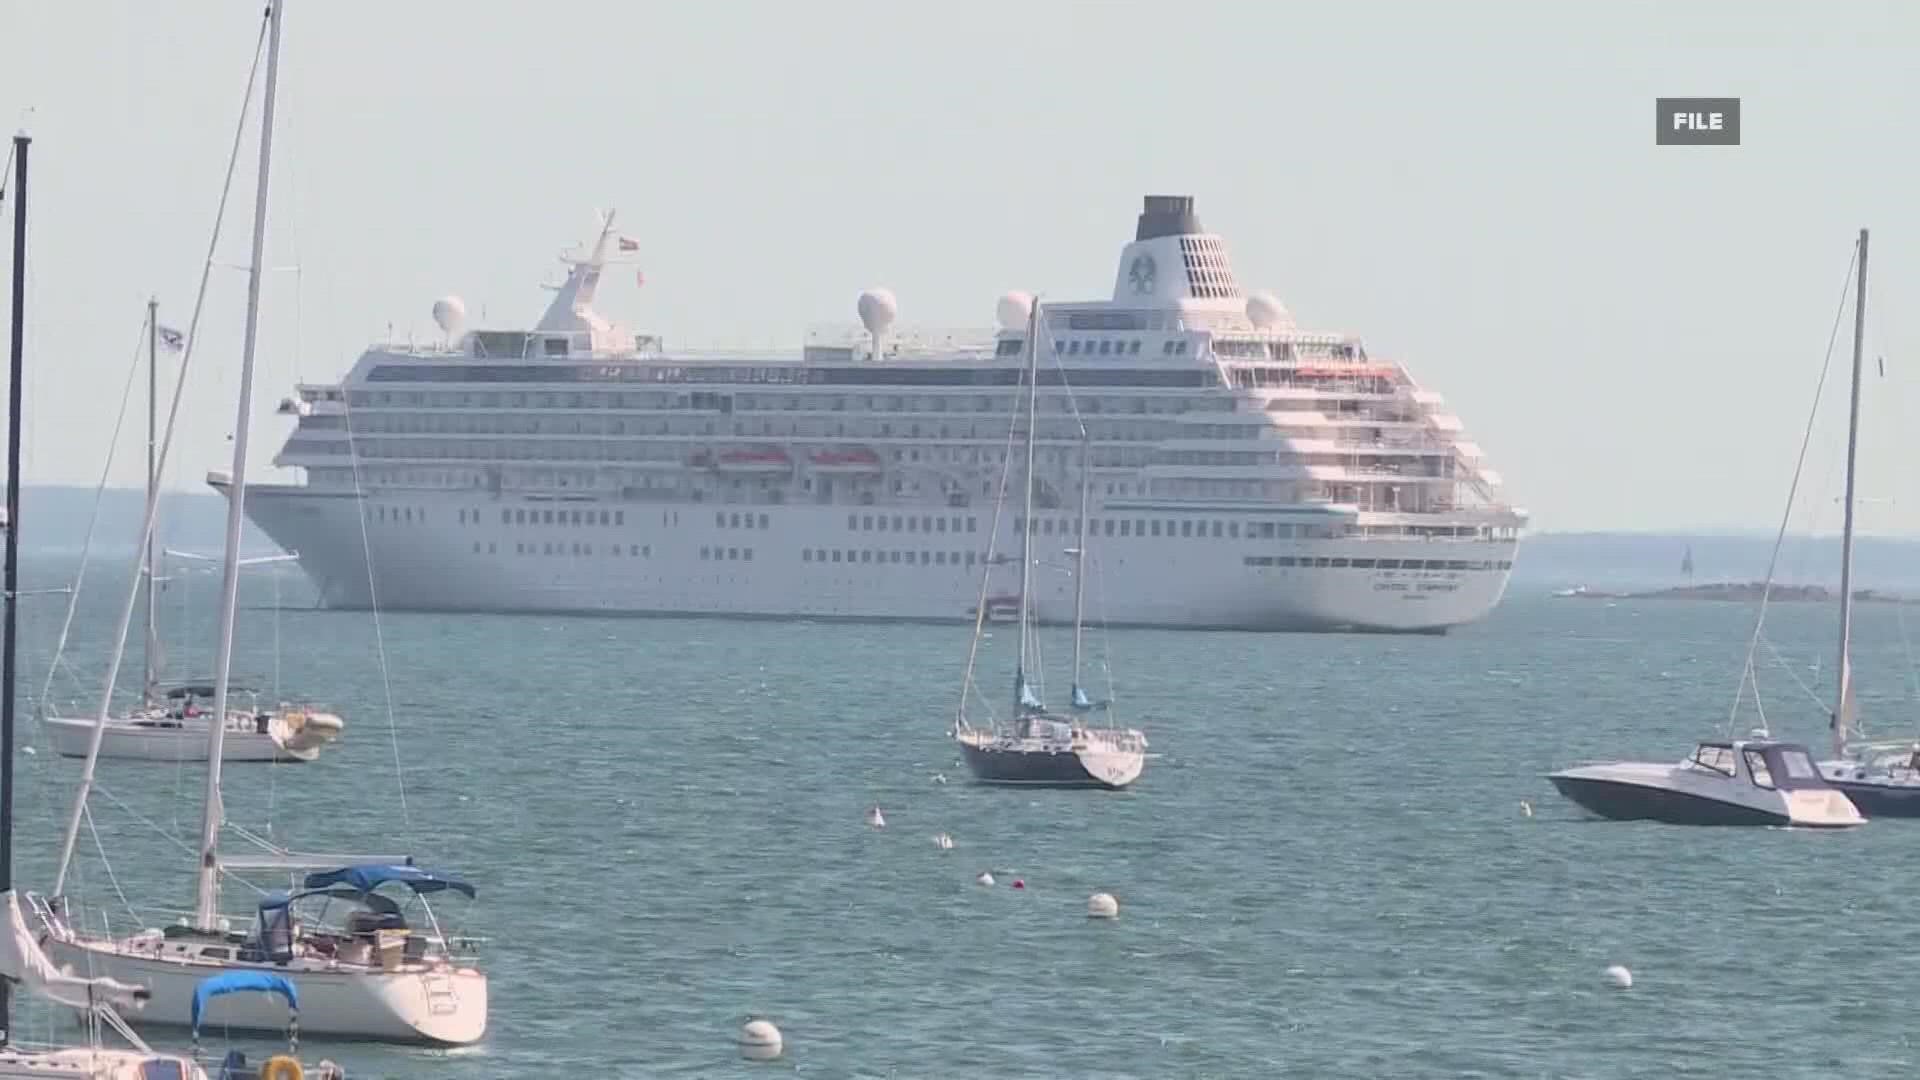 If passed, the plan would ban cruise ships in April and November, and restrict movement in May through October, in addition to daily visitor caps.